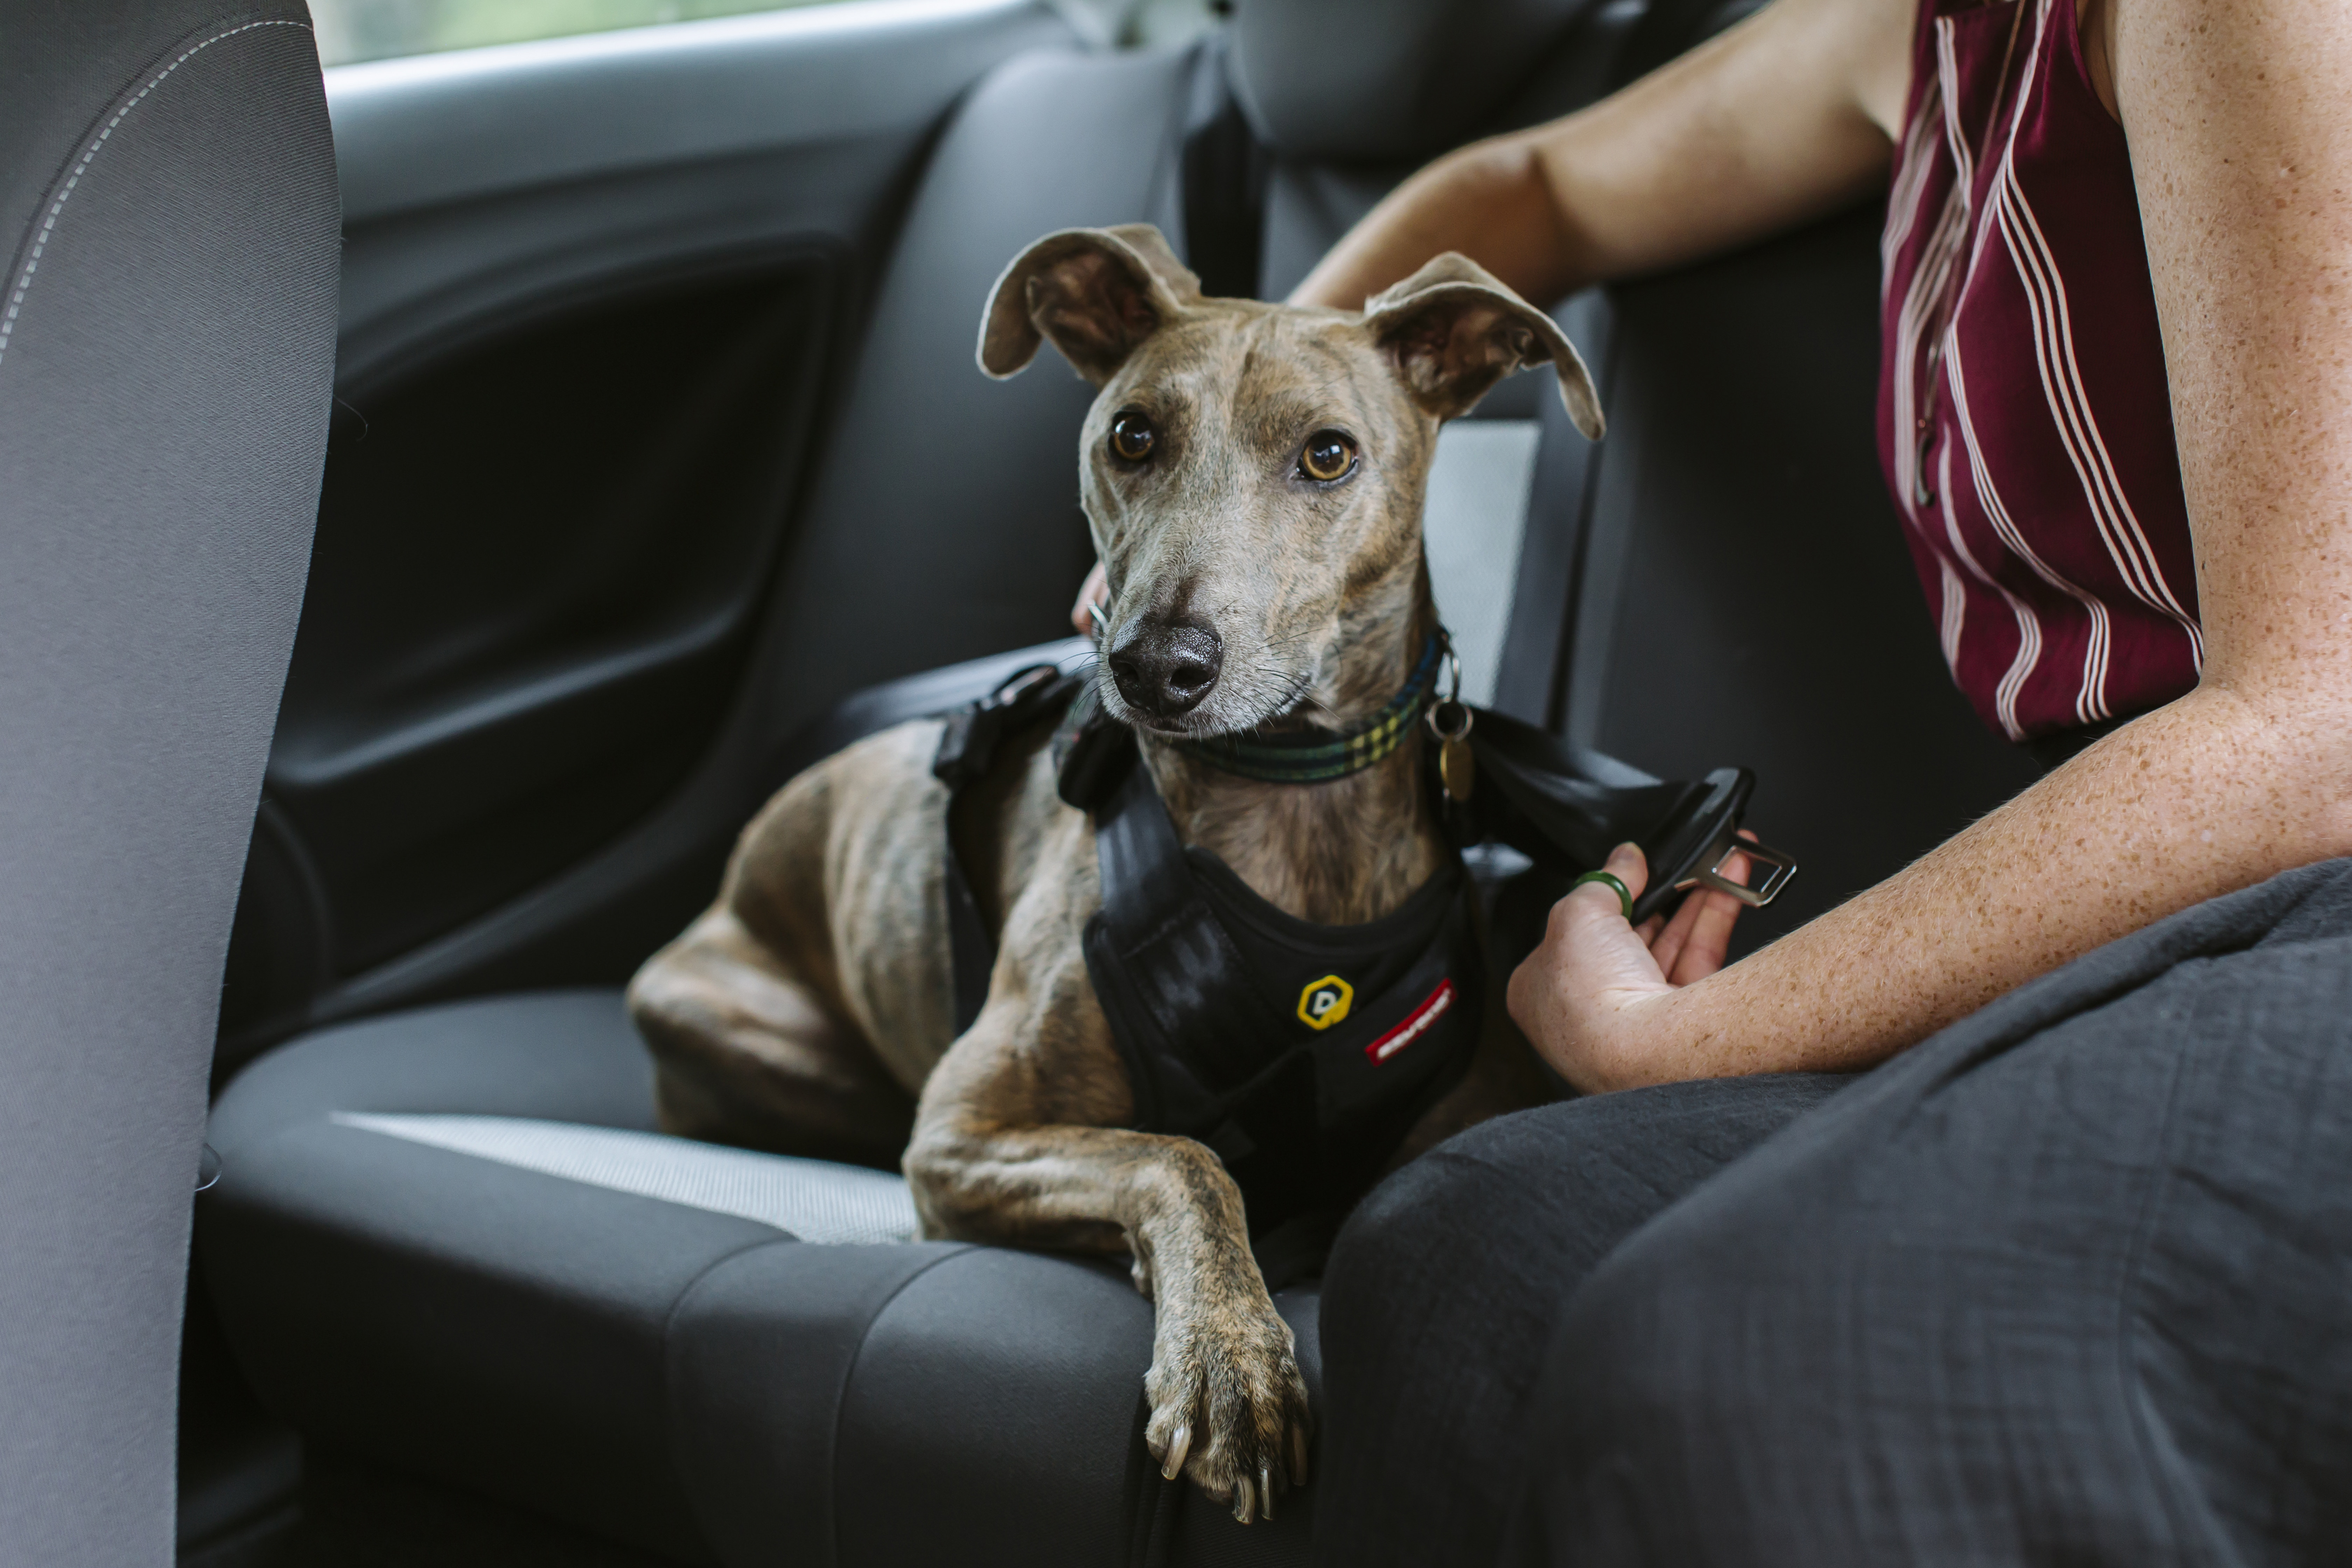 Lurcher dog being strapped into a seatbelt in a car